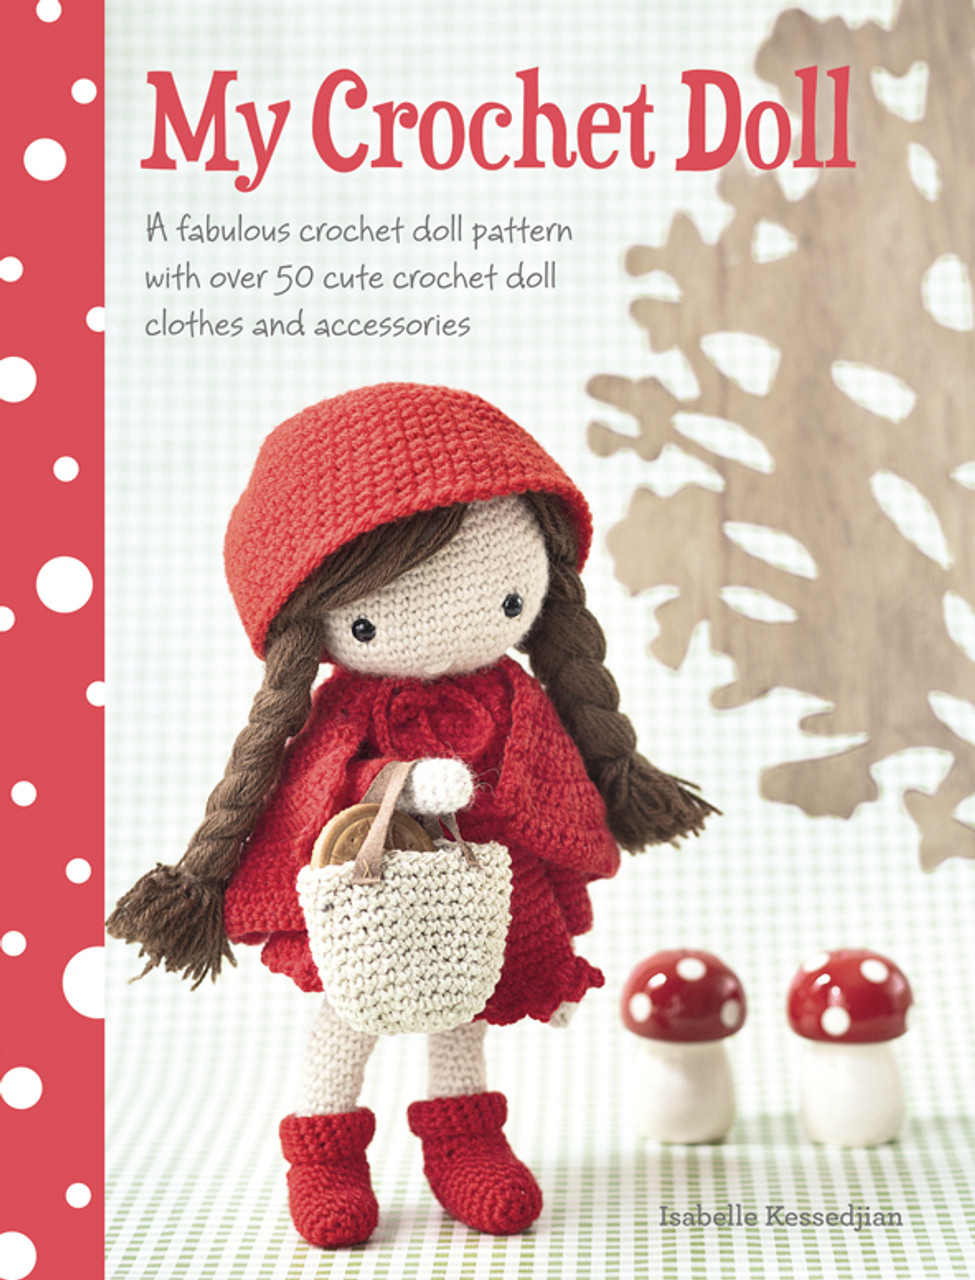 Amigurumi Doll Patterns: Cute and Fabulous Doll Ideals for You to Make: Doll Crochet Patterns [Book]